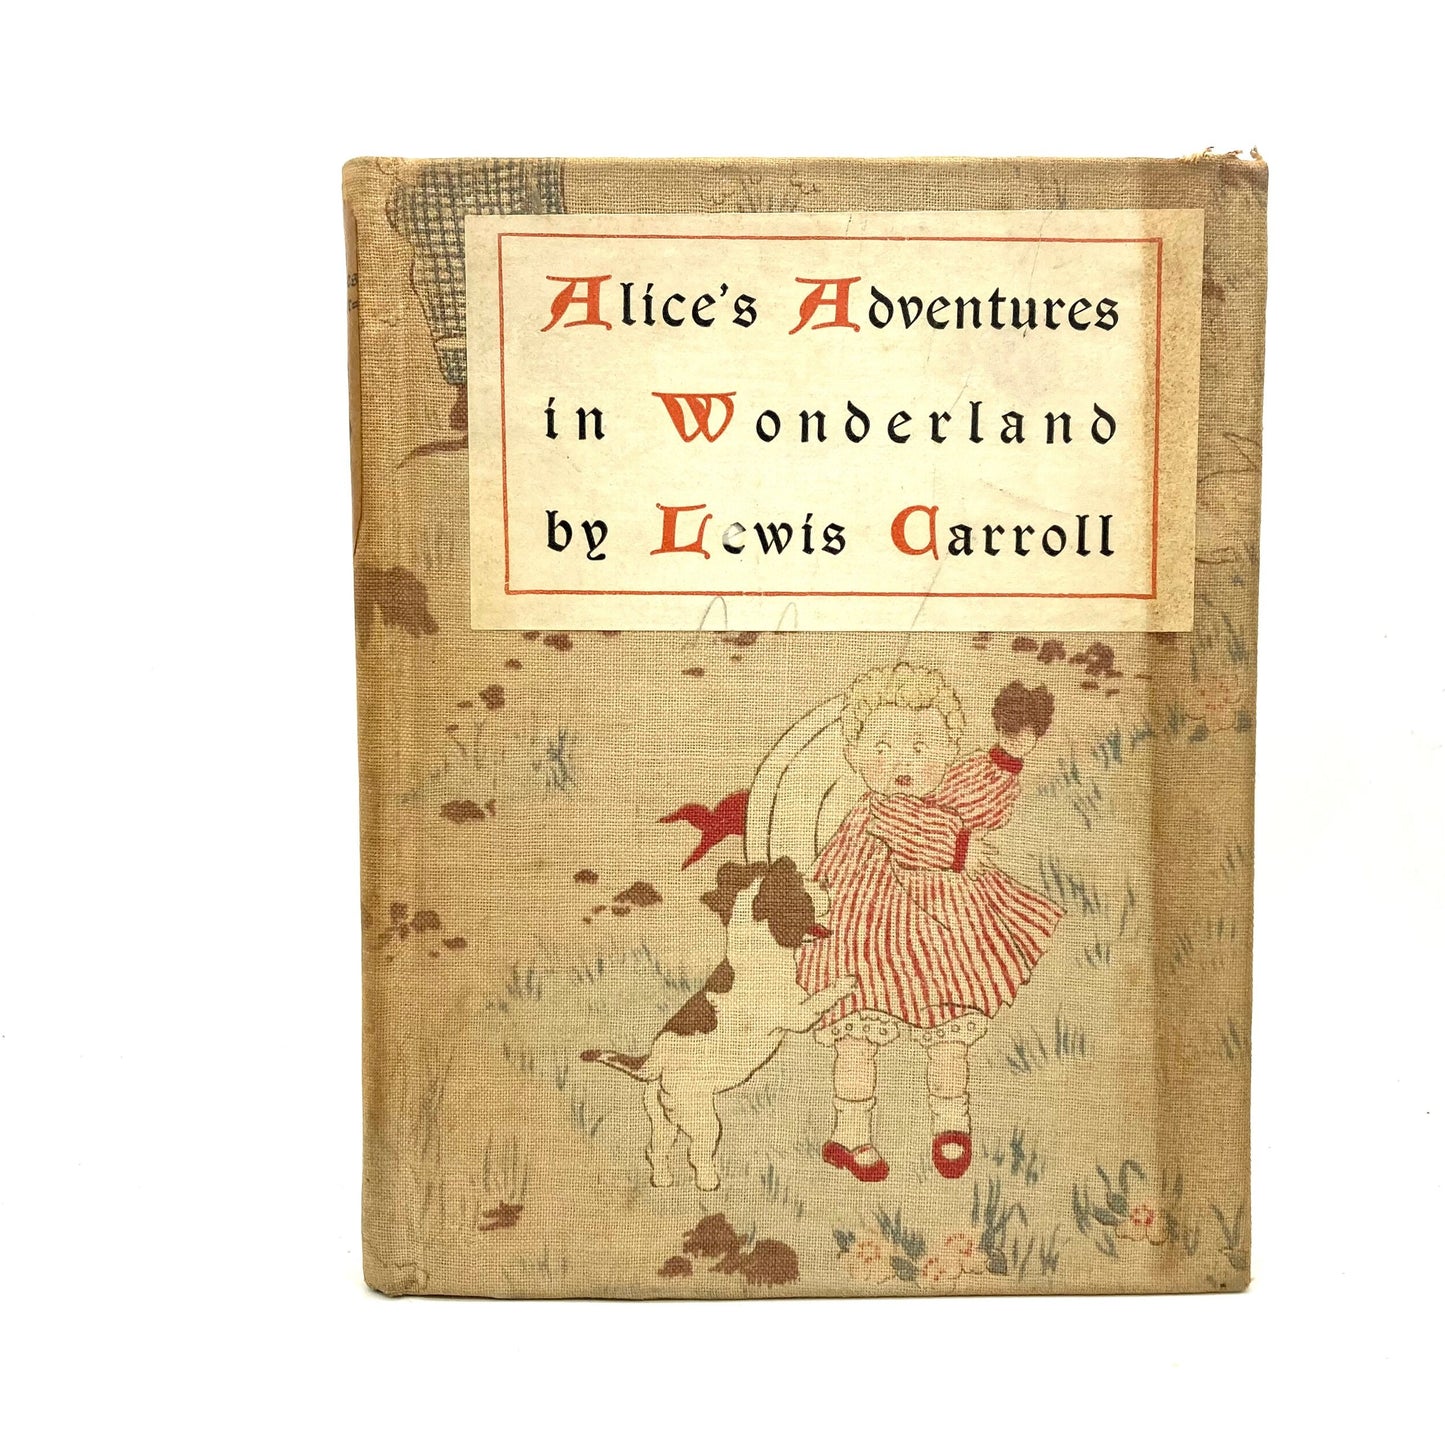 CARROLL, Lewis "Alice in Wonderland"/"Through the Looking Glass" [Henry Altemus, 1897/1900] - Buzz Bookstore